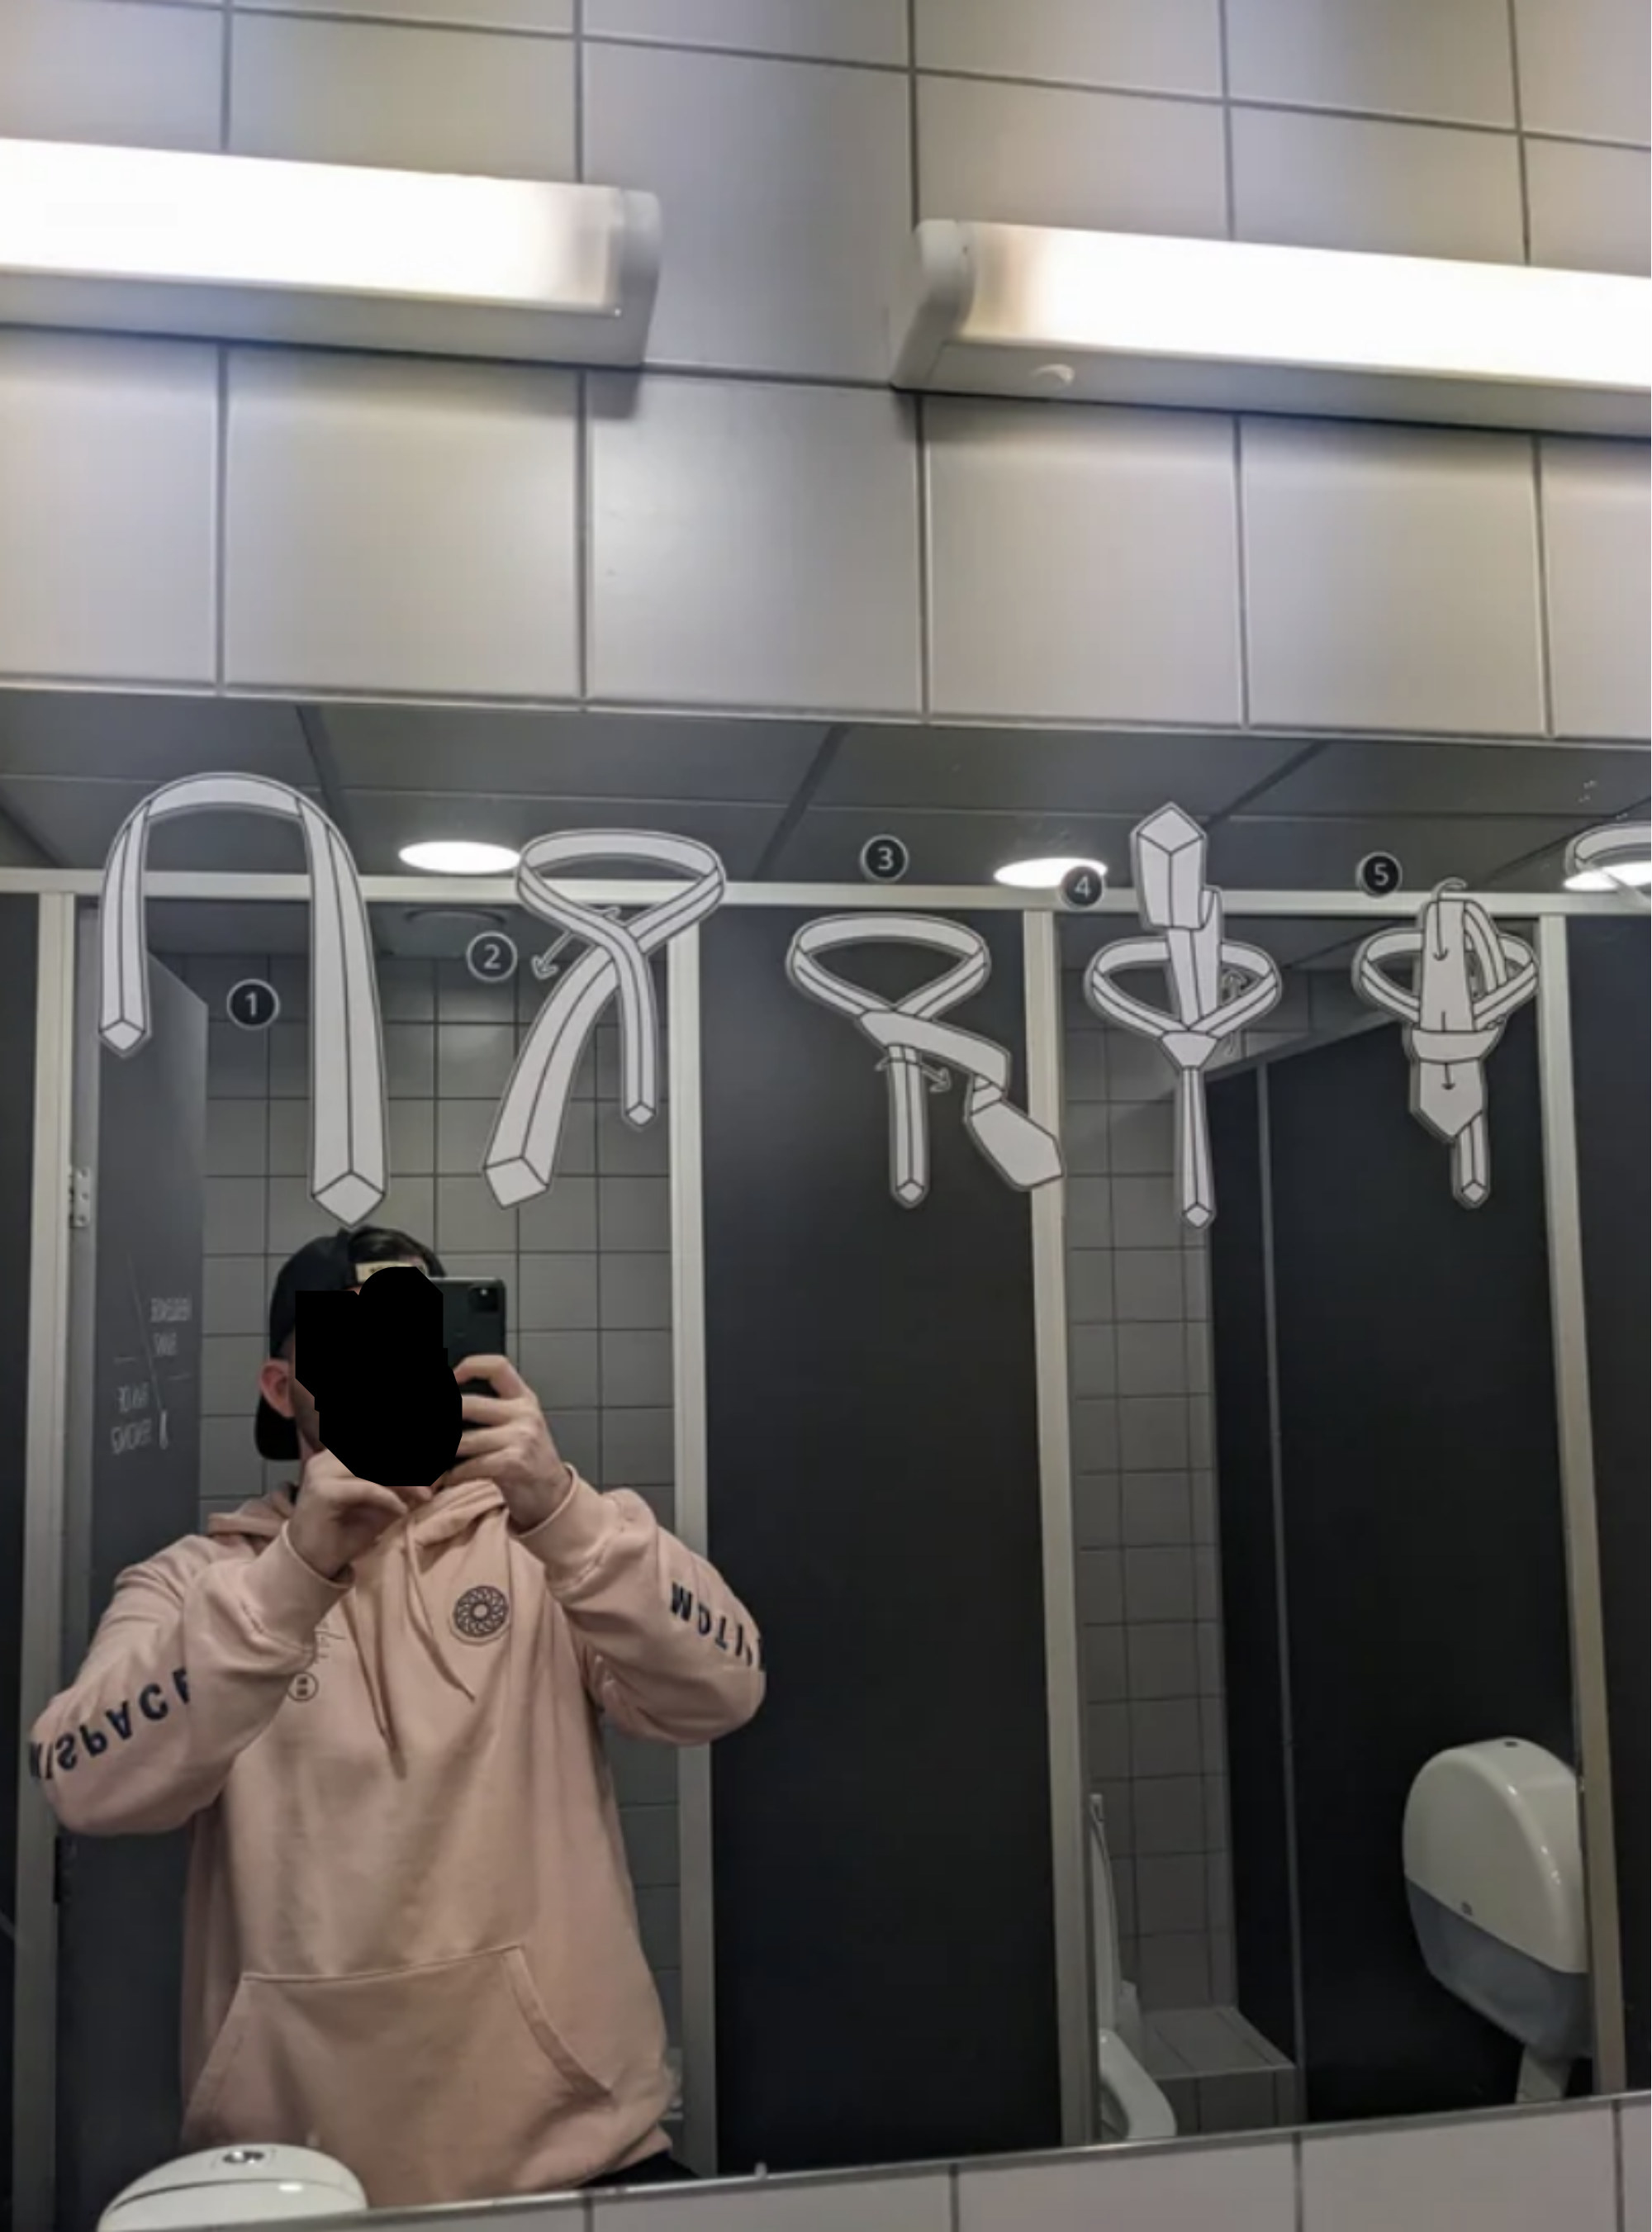 Instructions on how to tie a tie on a bathroom mirror